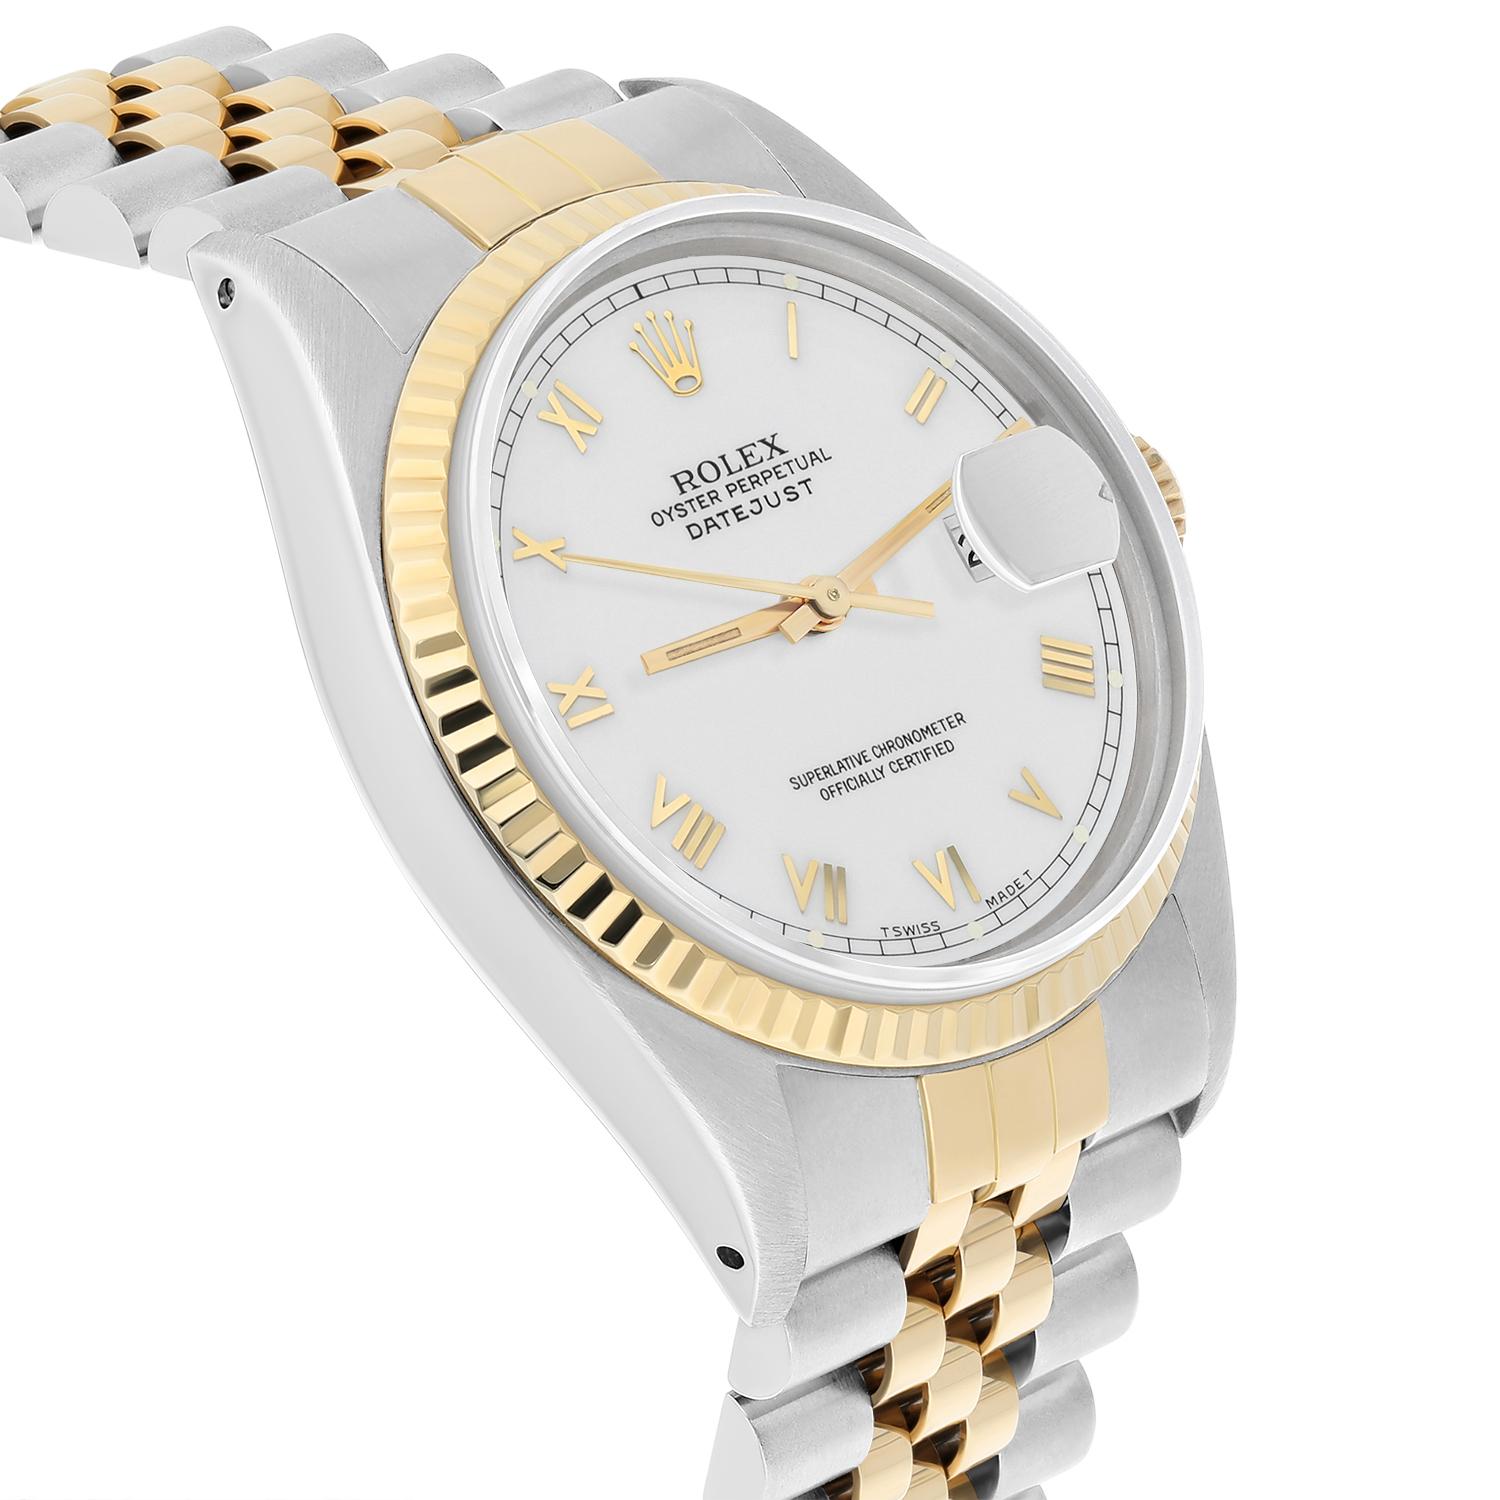 Rolex Datejust 36mm Two Tone White Roman Numeral Dial Jubilee 16013 Circa 1987 In Excellent Condition For Sale In New York, NY